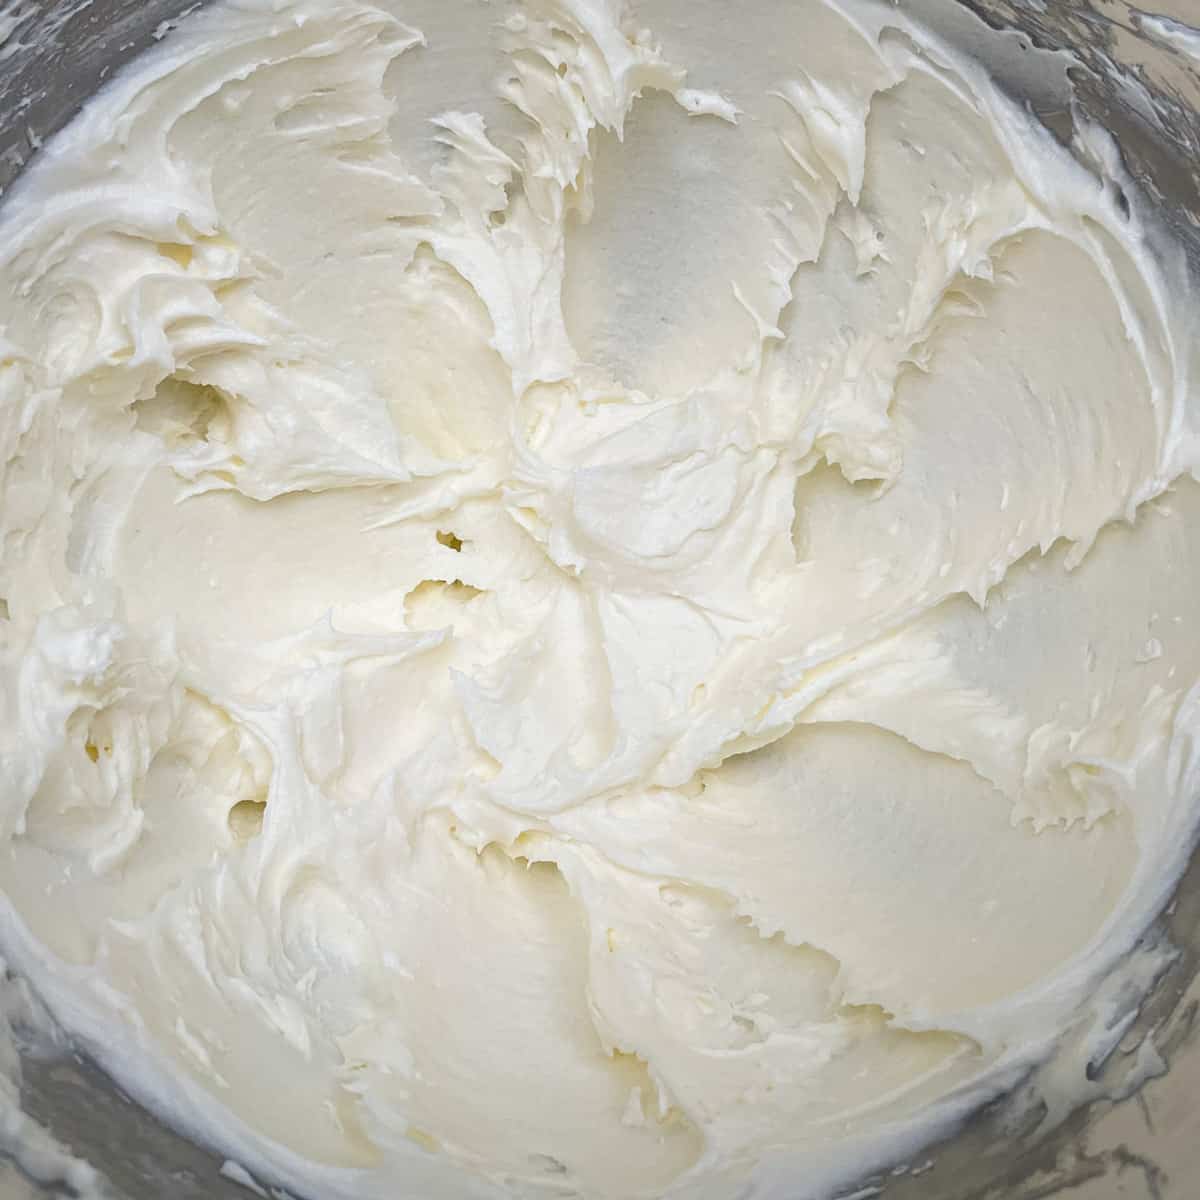 How silky smooth cream cheese and butter looks after adding the sugar and mixing for 3 minutes.